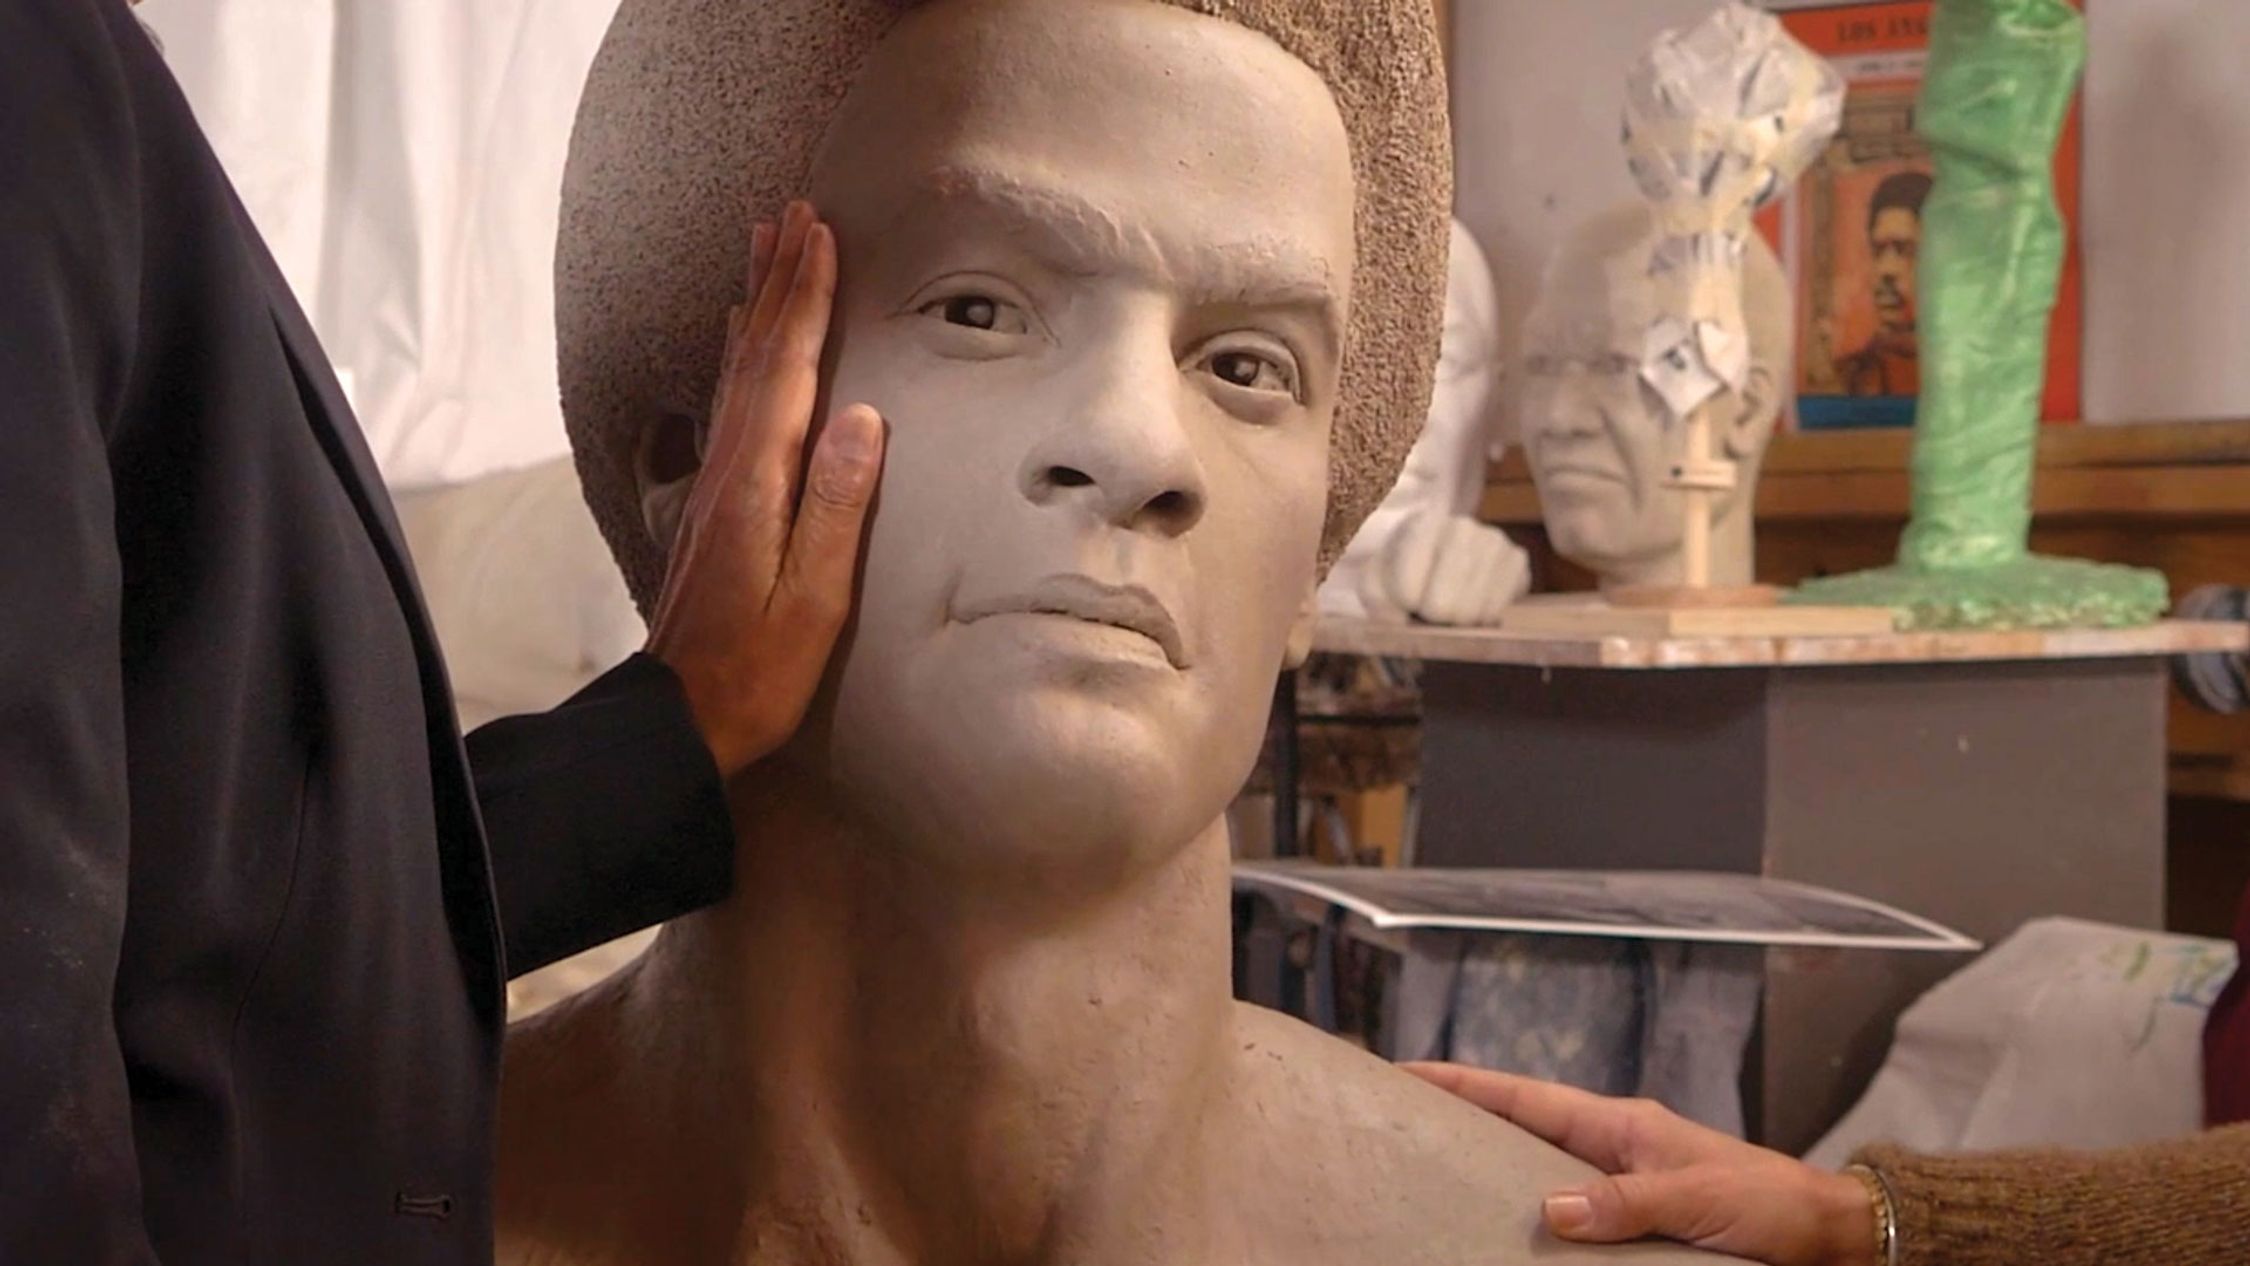 A person's hand is gently touching the cheek of a large, unfinished sculpted head and shoulders. The sculpture is highly detailed, with lifelike facial features, and it is mounted on a stand. In the background, there is an assortment of artistic materials and another bust sculpture, indicating that the setting is likely an artist's studio.